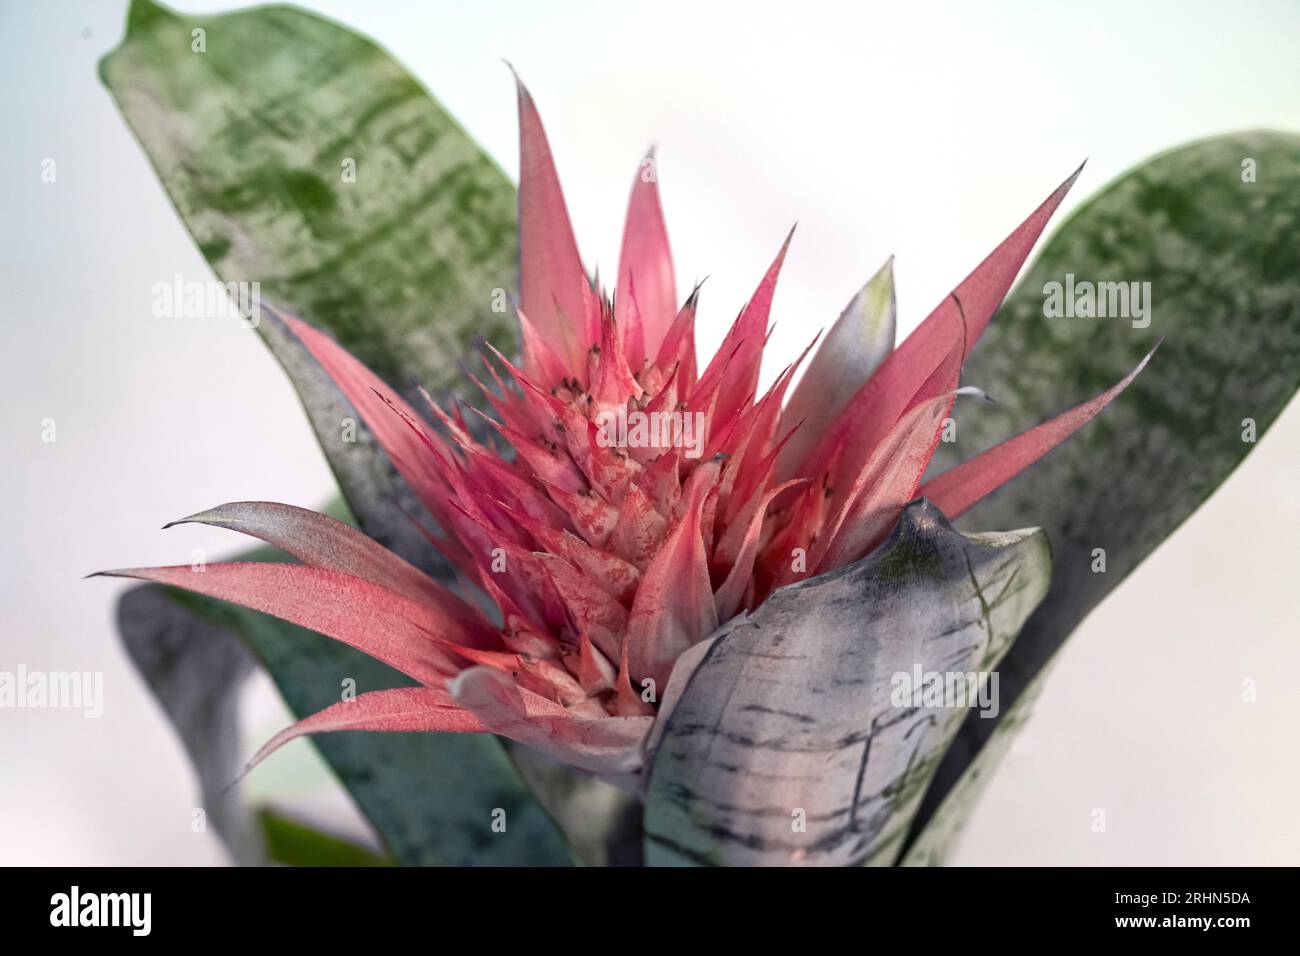 Aechmea fasciata, the silver vase or, urn plant, or simply Aechmea [Achmea] On white background  is a species of flowering plant in the bromeliad fami Stock Photo